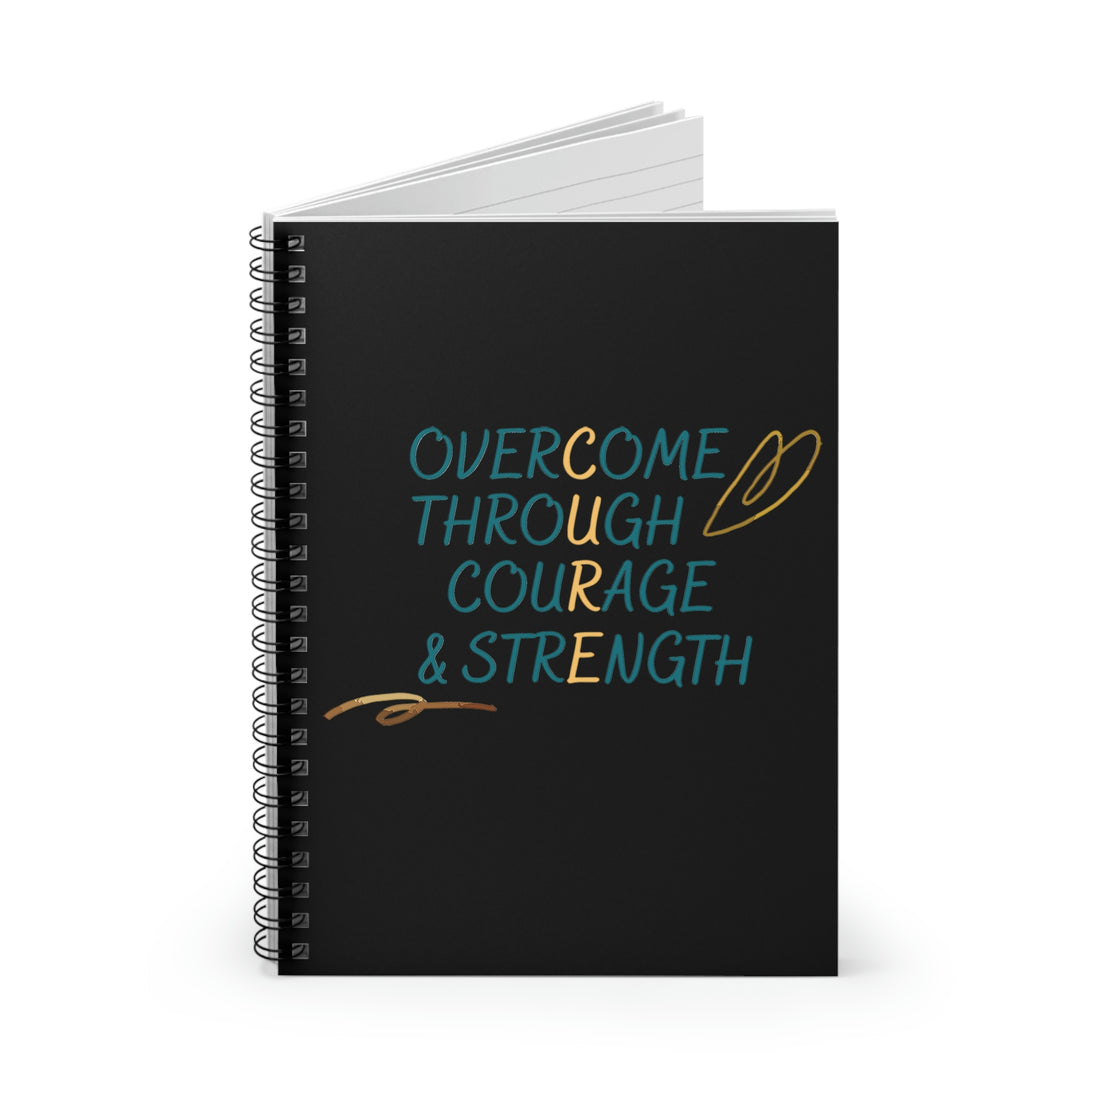 Overcome Through Courage and Strength - Spiral Notebook - Ruled Line